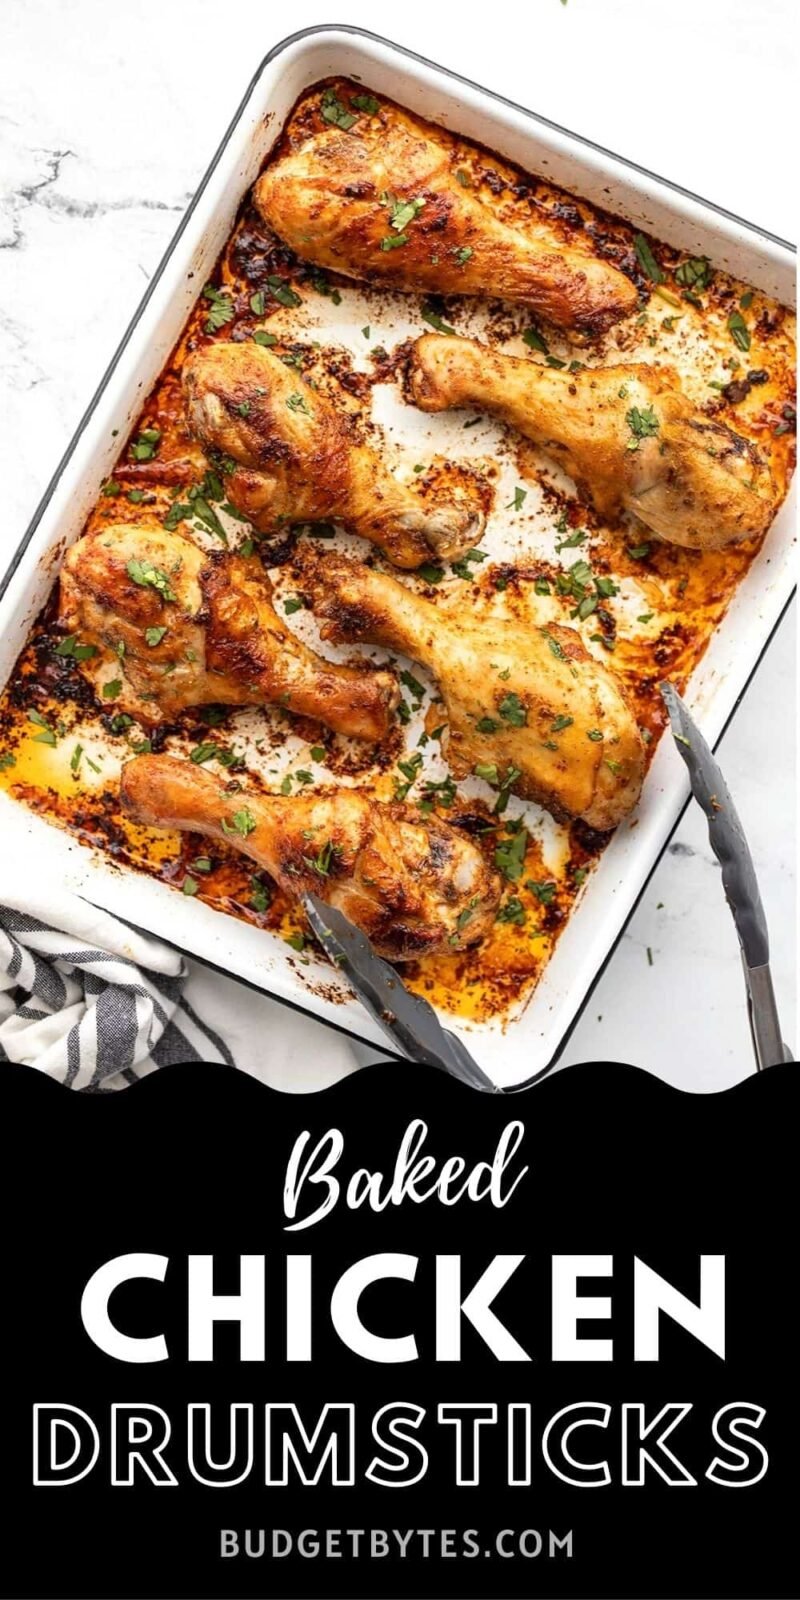 Baked chicken drumsticks on a baking sheet with tongs, title text at the bottom